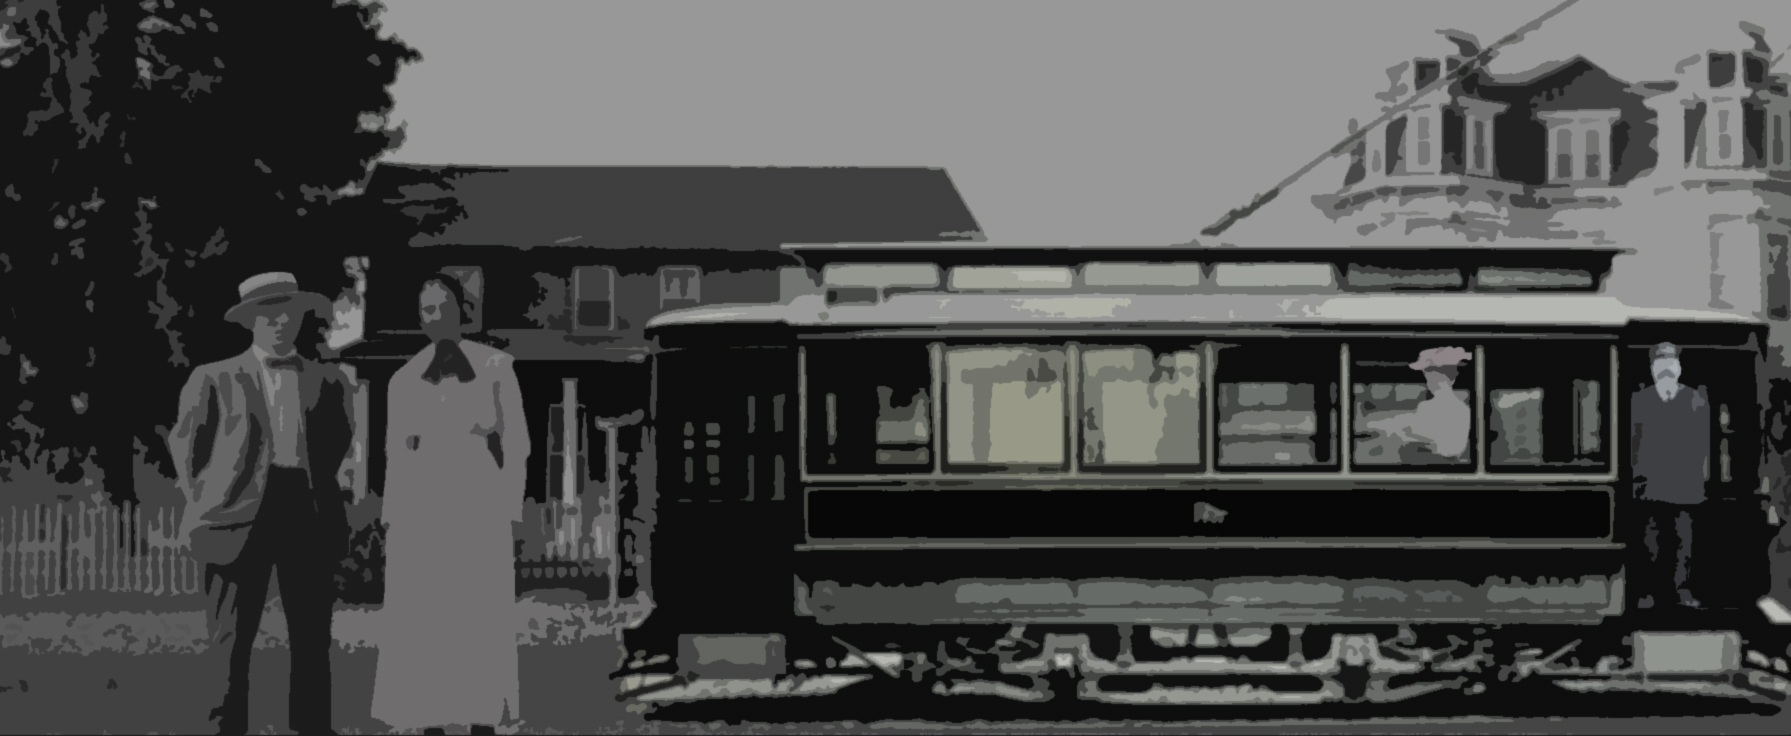 Artistic rendering of streetcar and people